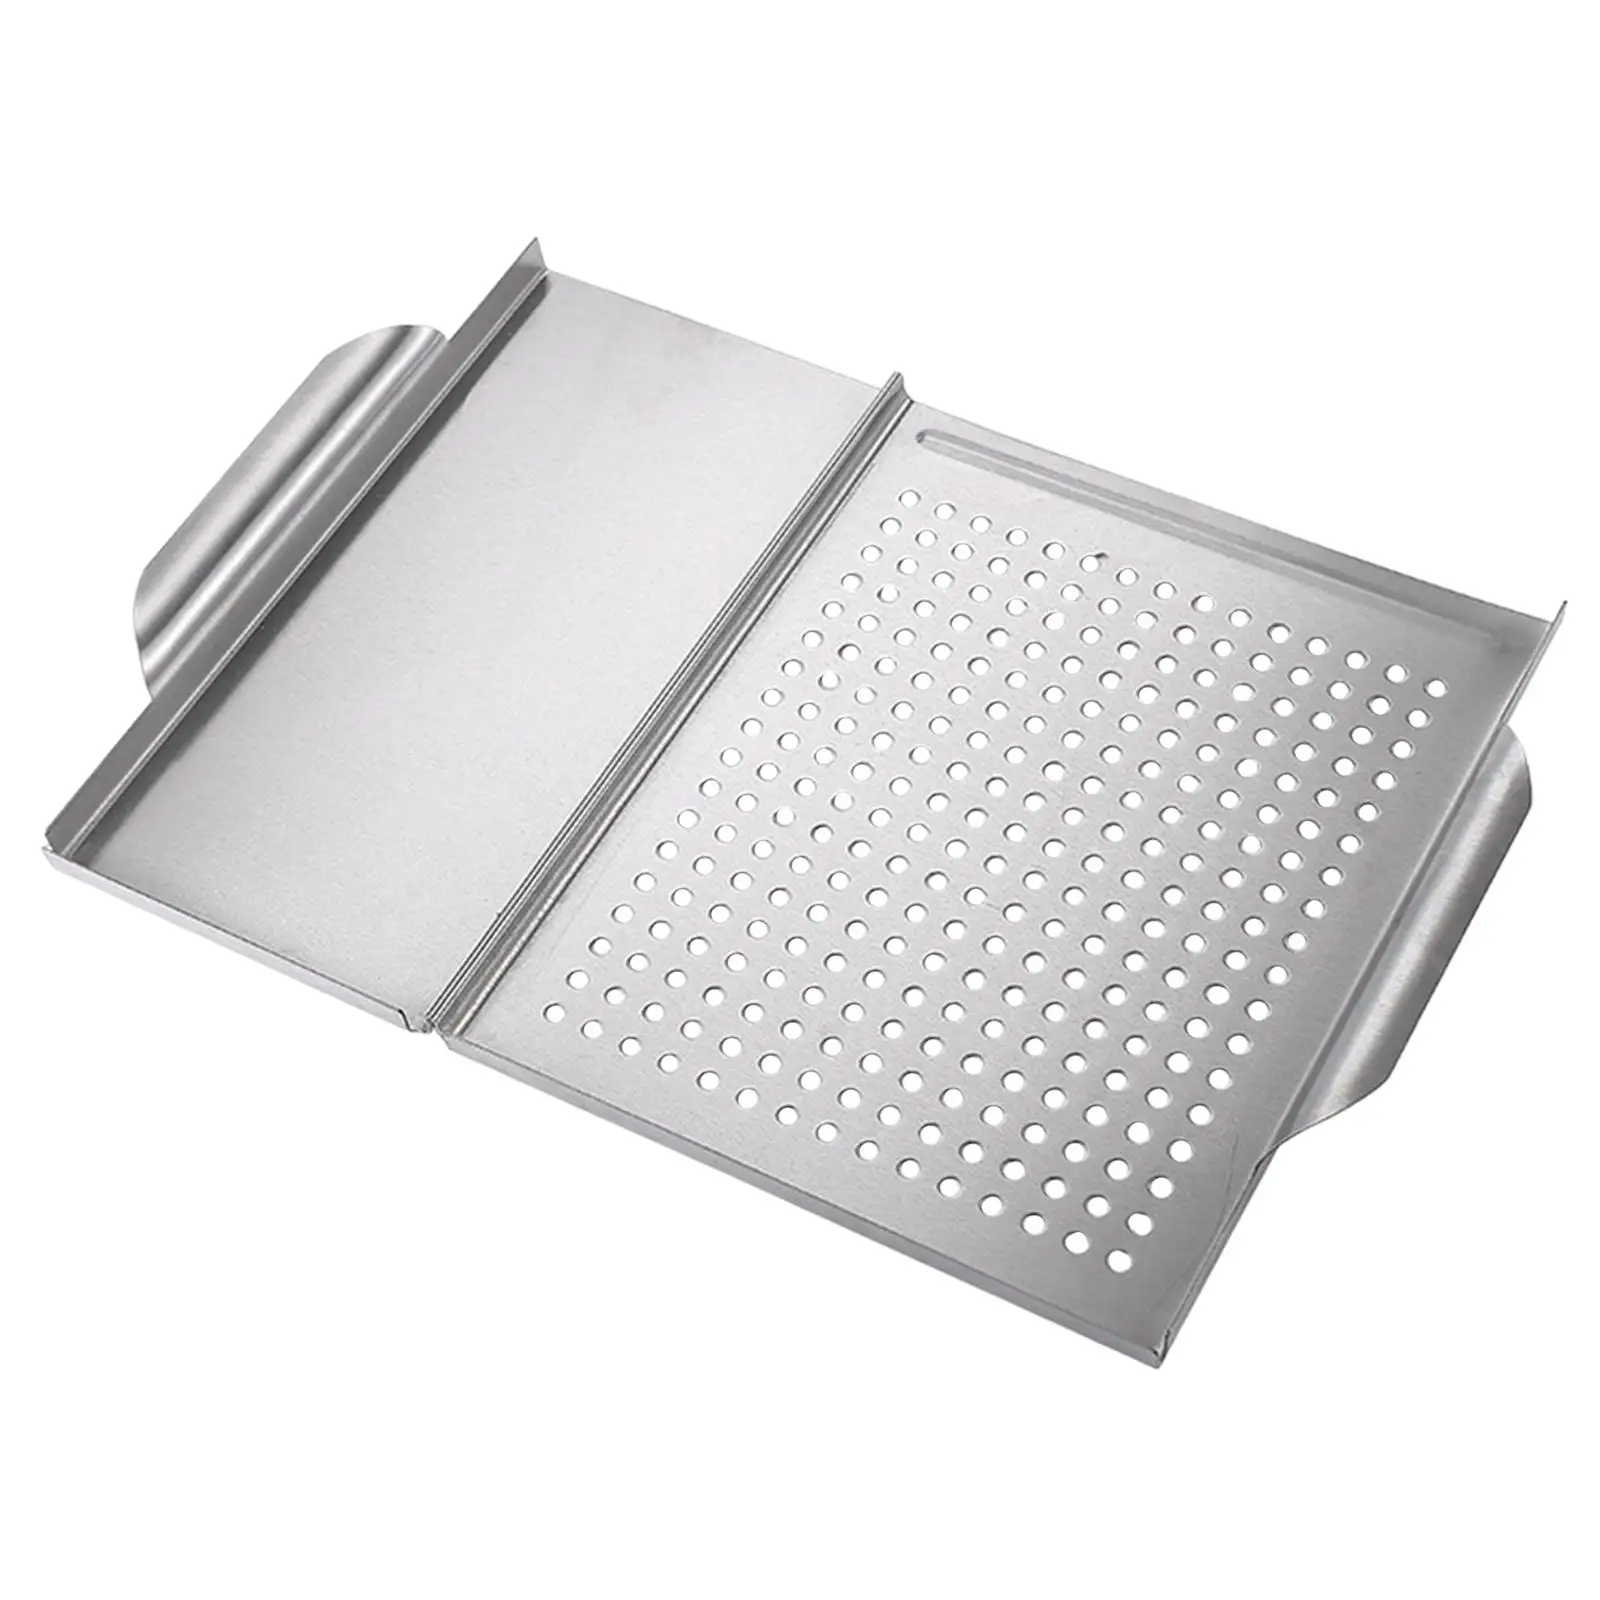 Grilling Tray Nonstick Grill Basket with Holes Durable Grill Pans for Restaurant Tailgating BBQ Charcoal Baking Cooking